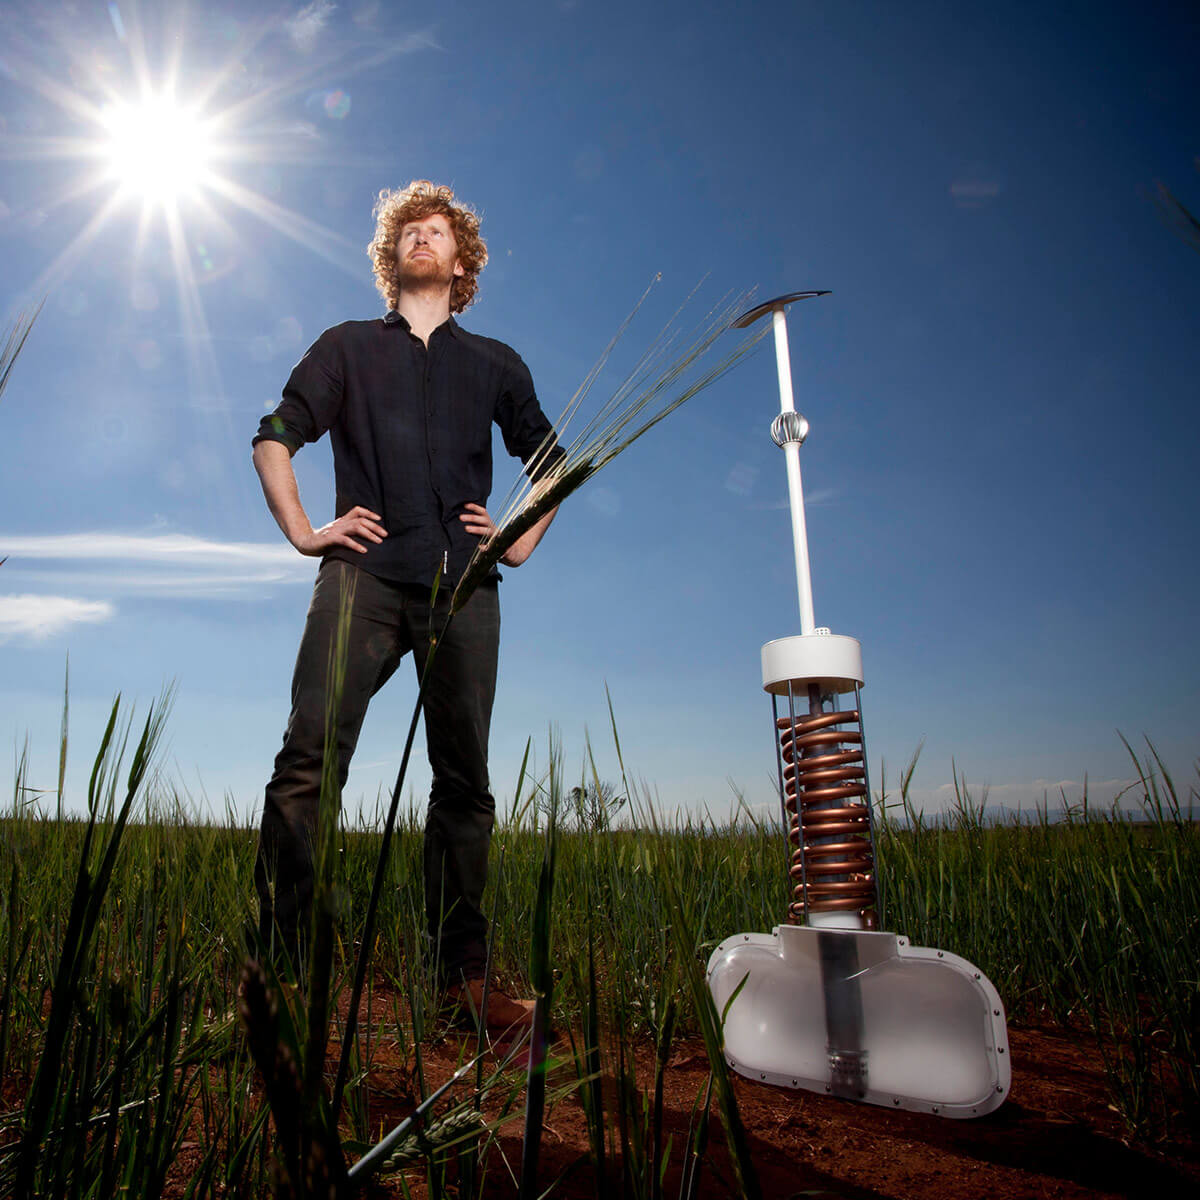 2011 international winner of the James Dyson Award, Edward Linacre, with his invention Airdrop